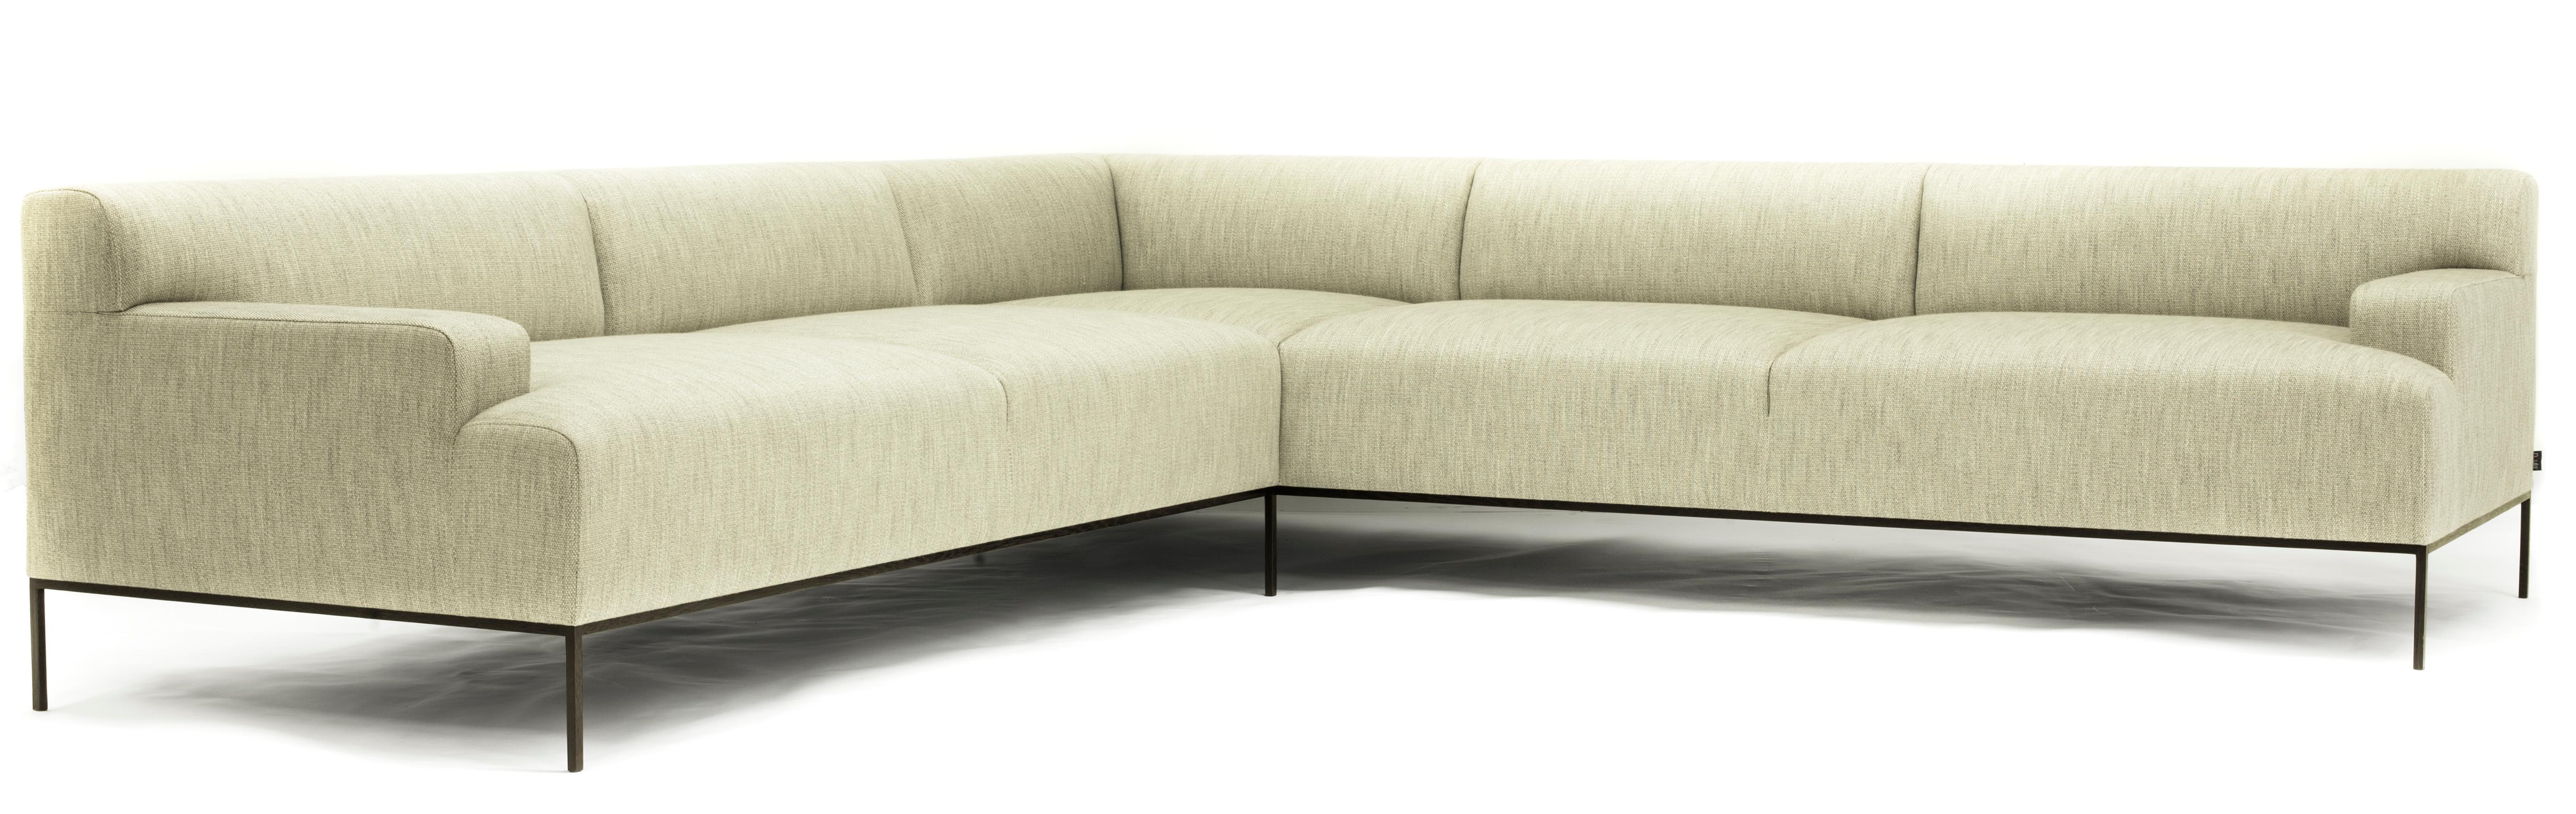 The Stiletto sectional is sophisticated and plush. Its sleek wengé frame and rich upholstery make this piece a perfect balance of comfort and luxury.